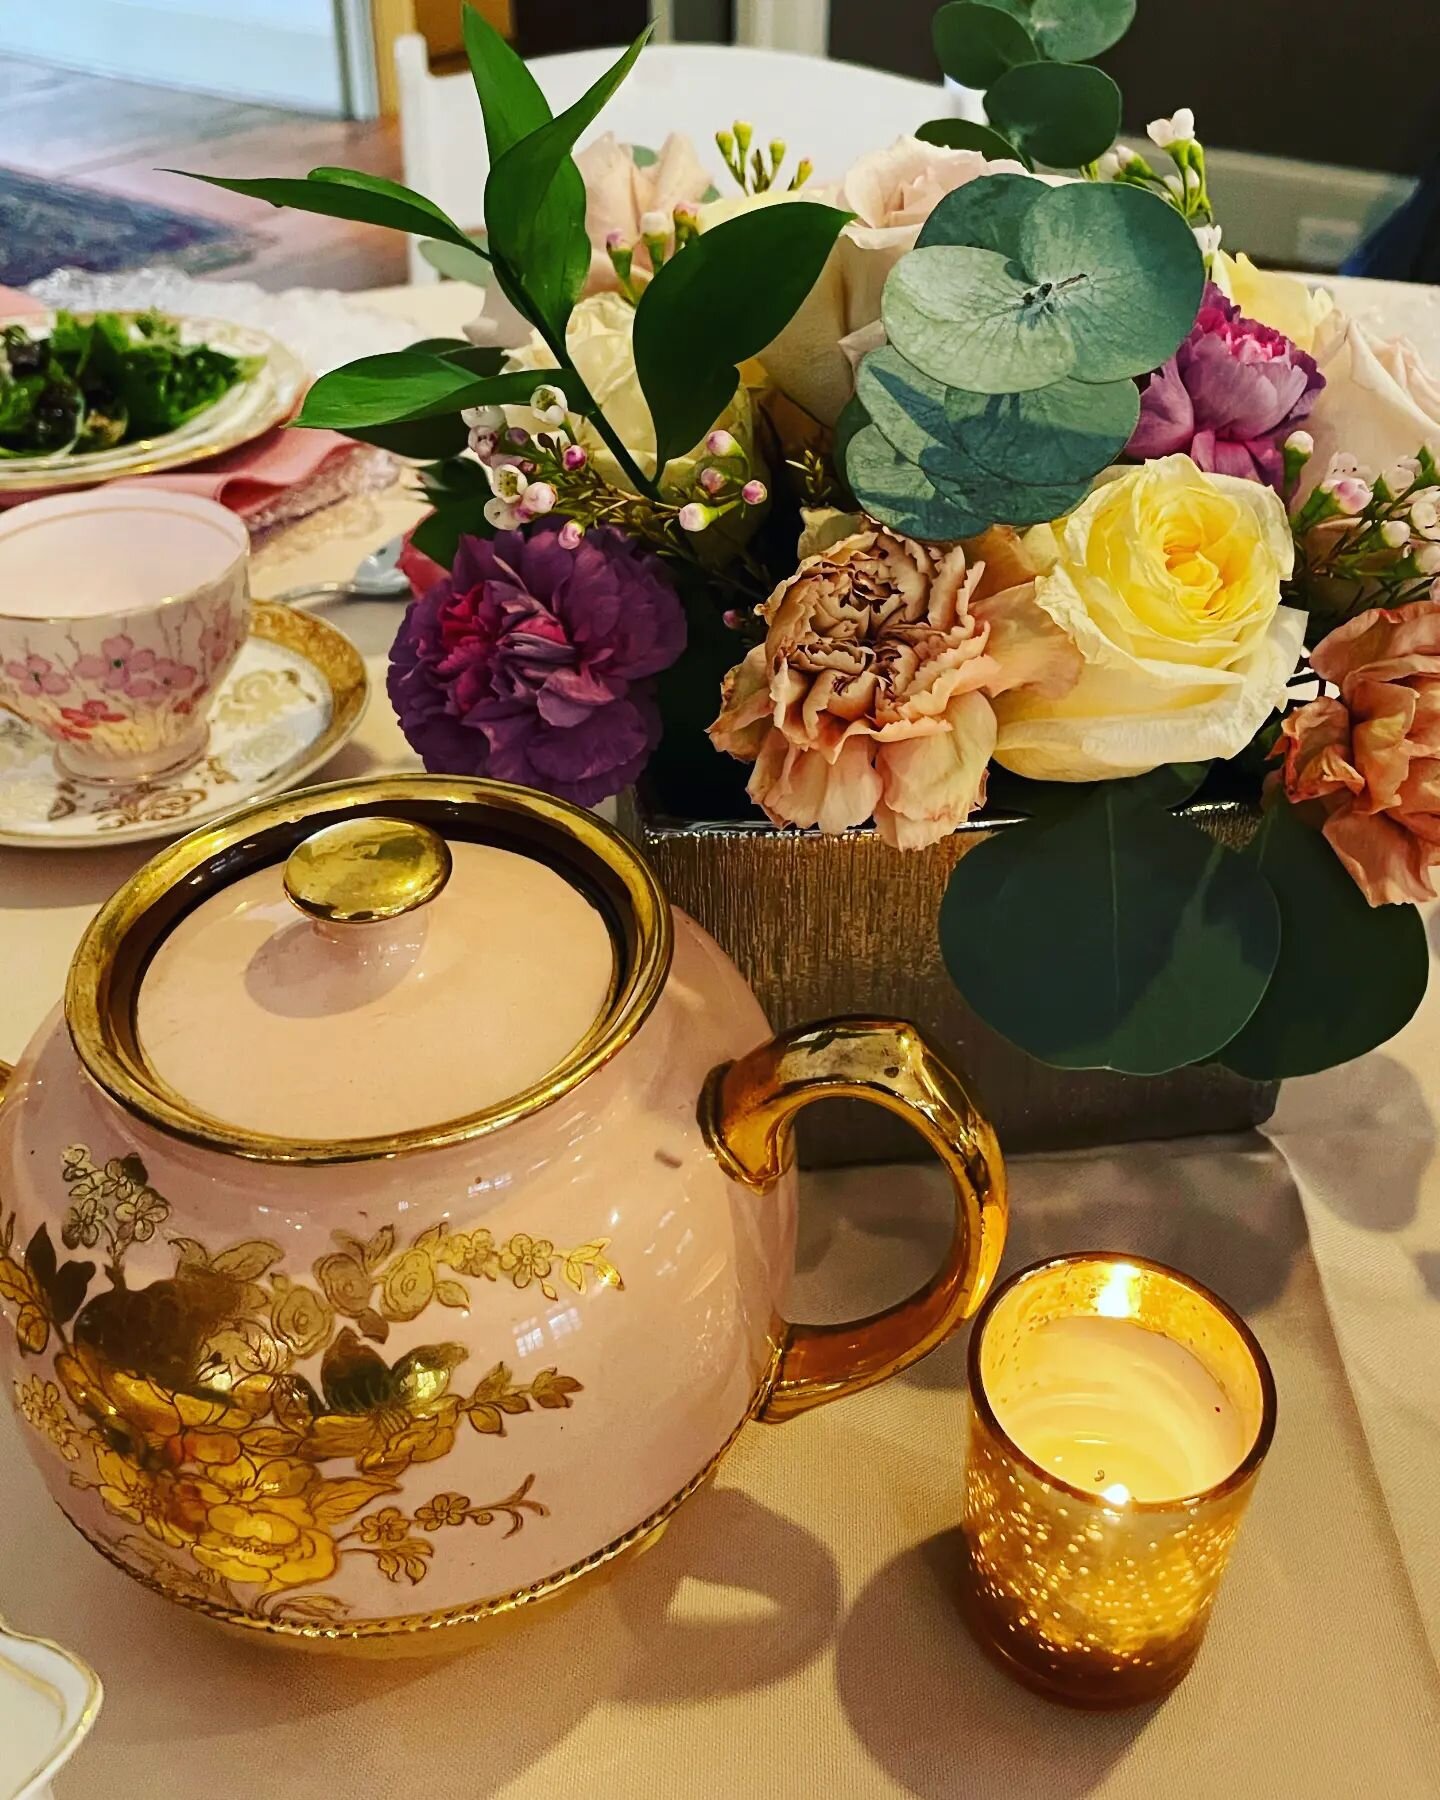 A Bridal Tea! Complete with all the trimmings to celebrate a beautiful Bride to be! 💕

Vintage Tea Sets provided by @vintageenglishteacup 
Event planned by @events_by_tiffany 
Florals provided by Kimberly @lovecreatedatl